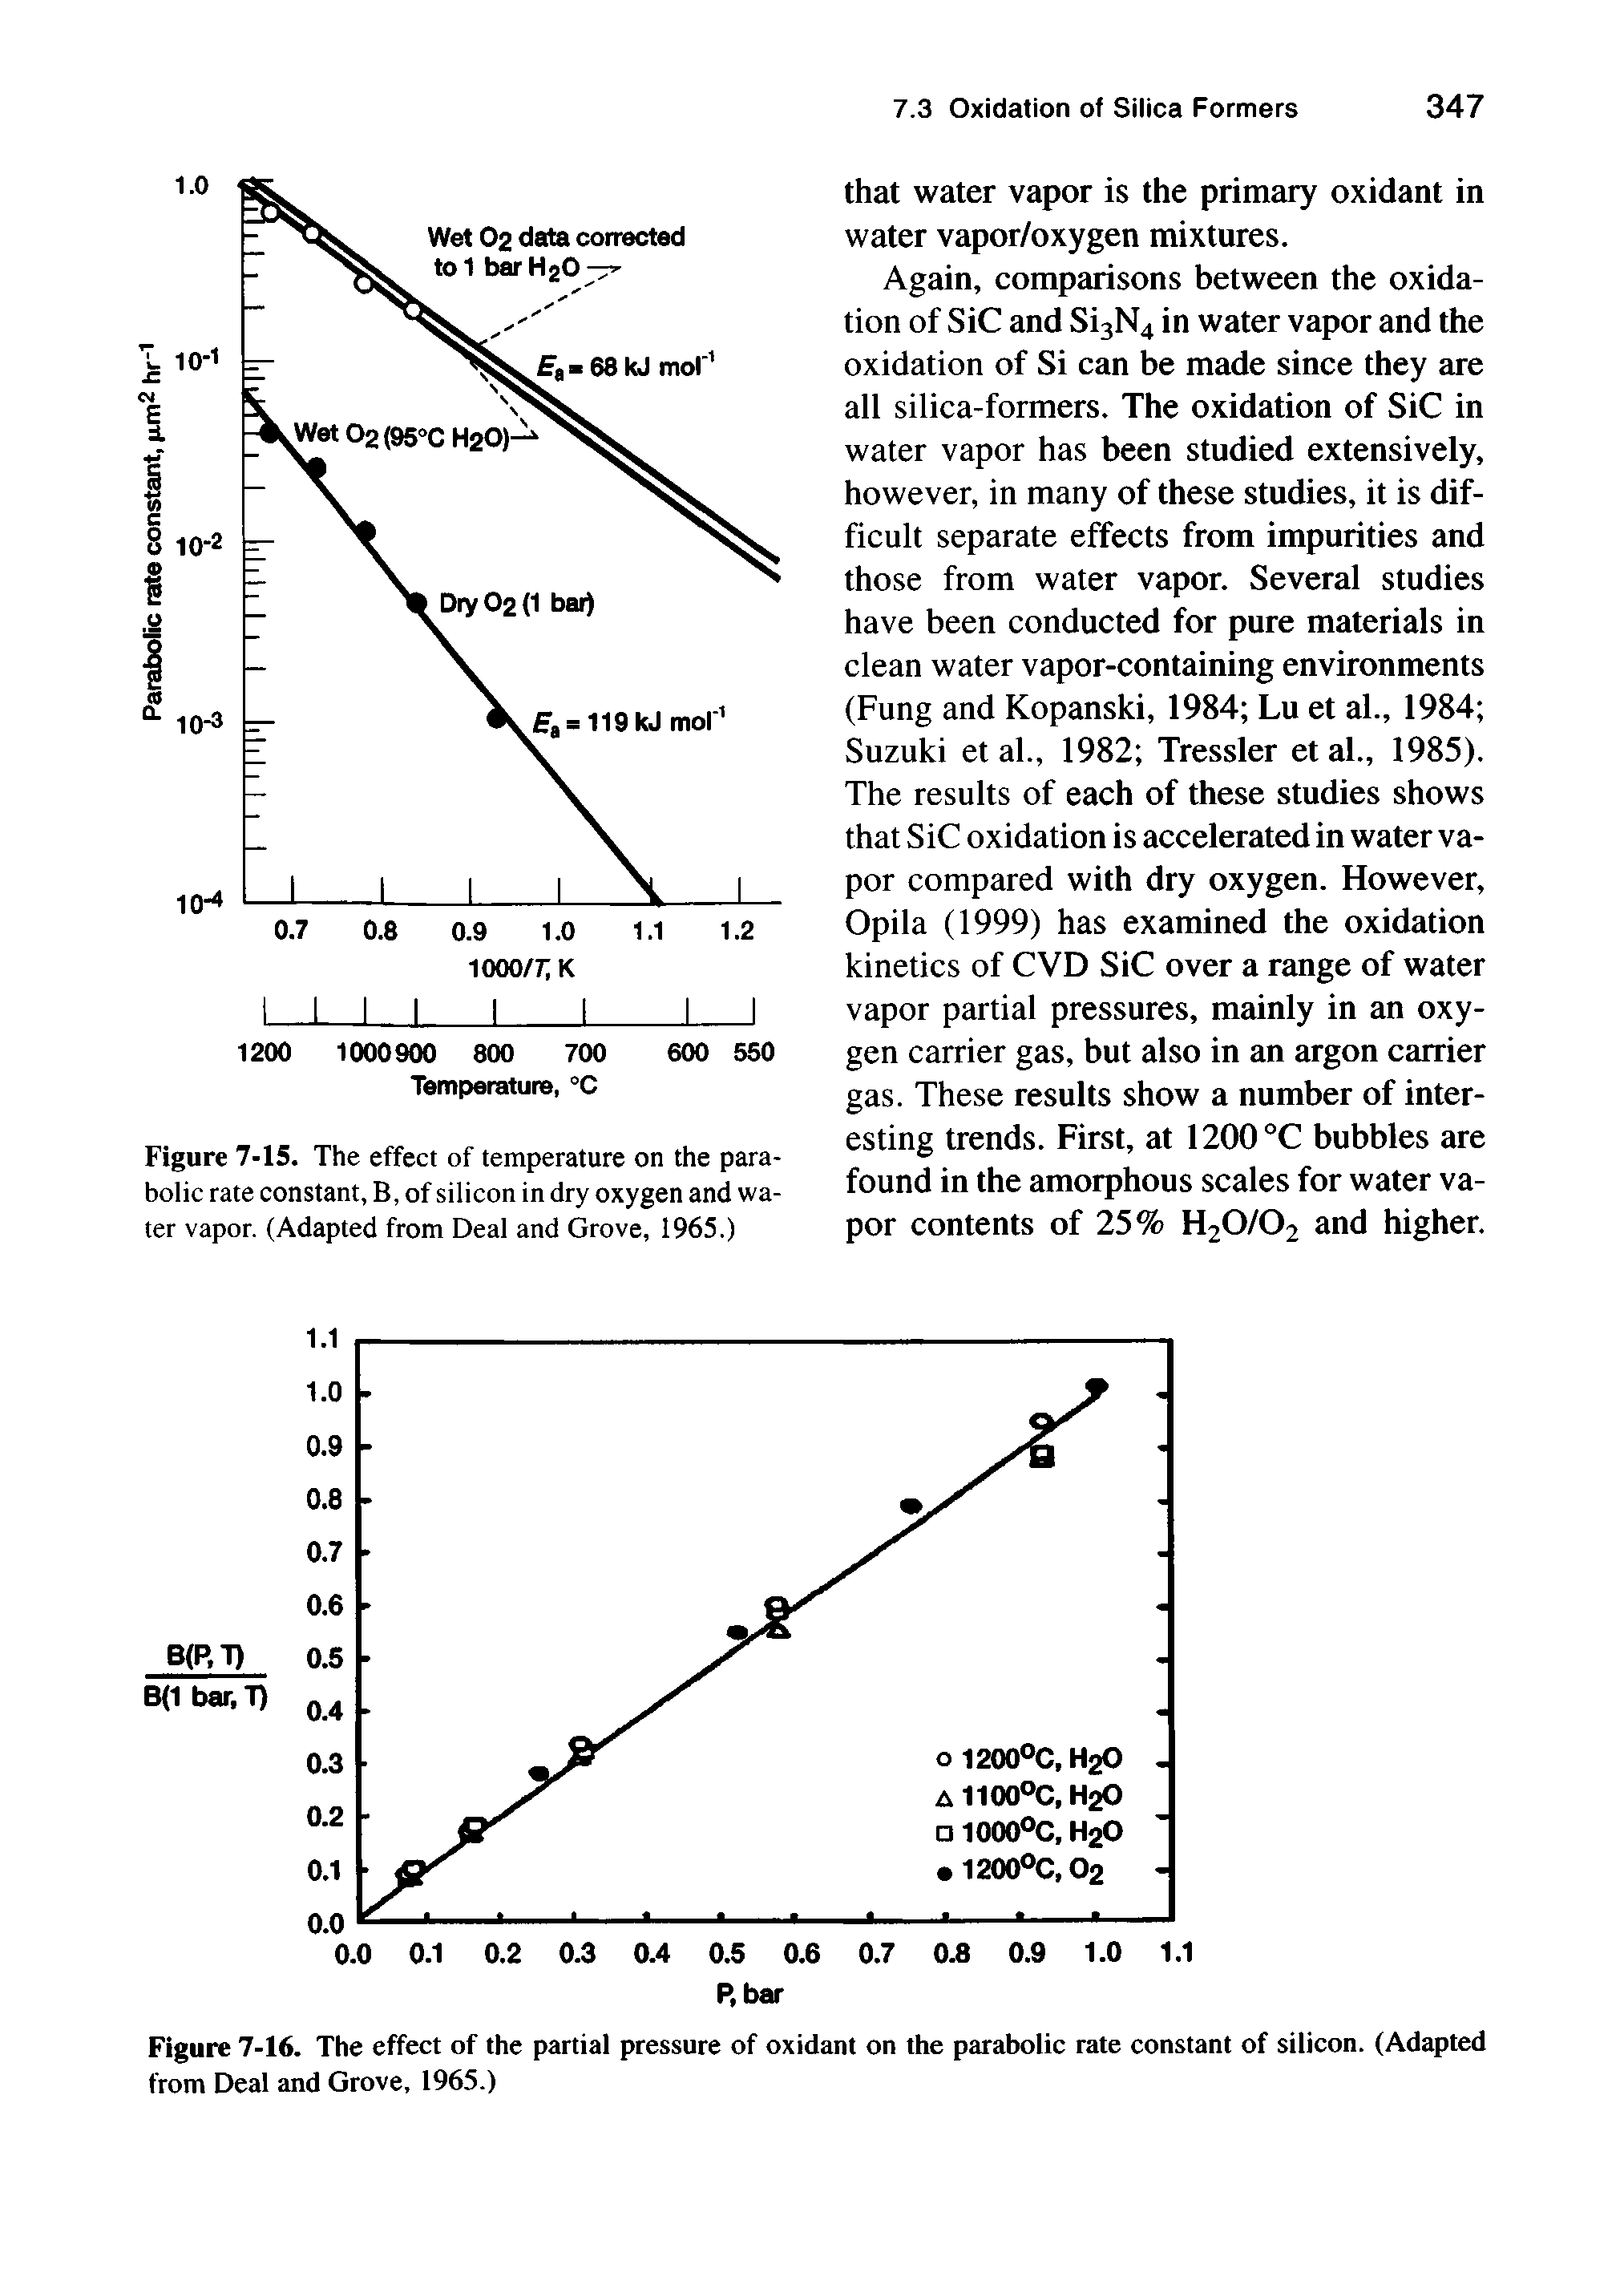 Figure 7-16. The effect of the partial pressure of oxidant on the parabolic rate constant of silicon. (Adapted from Deal and Grove, 1965.)...